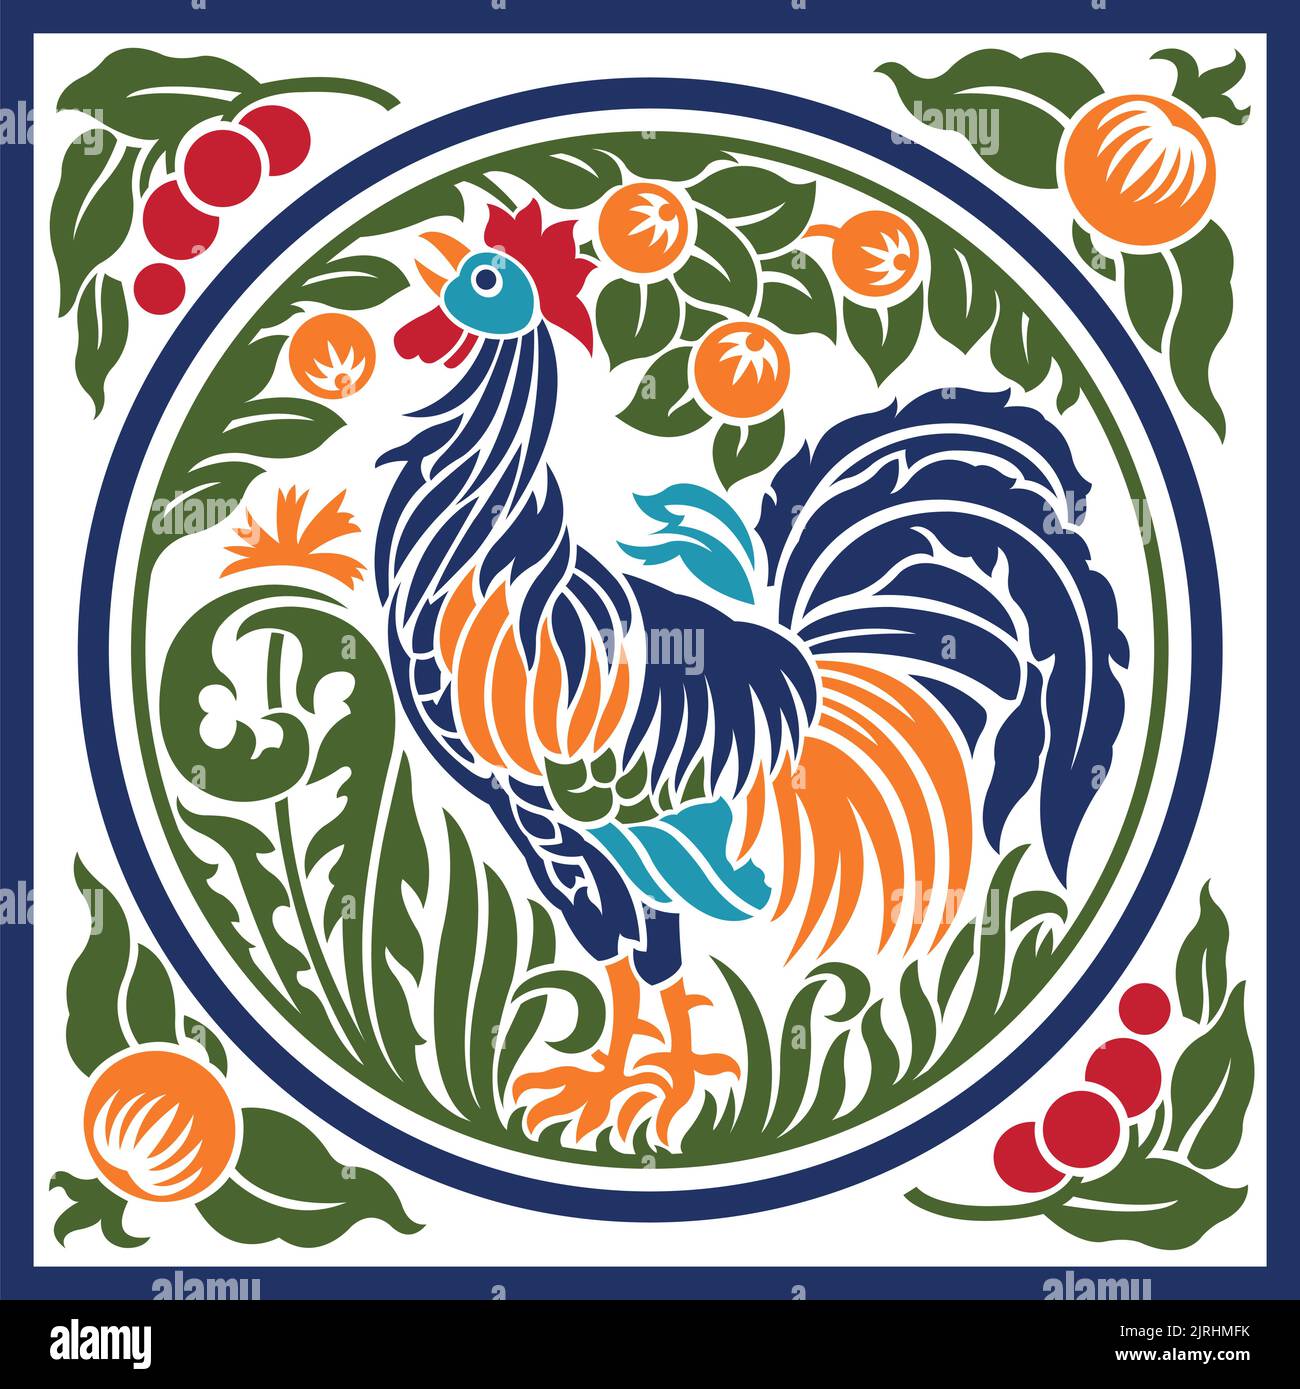 A vintage vector illustration of a crowing rooster surrounded by a garden. Stock Vector